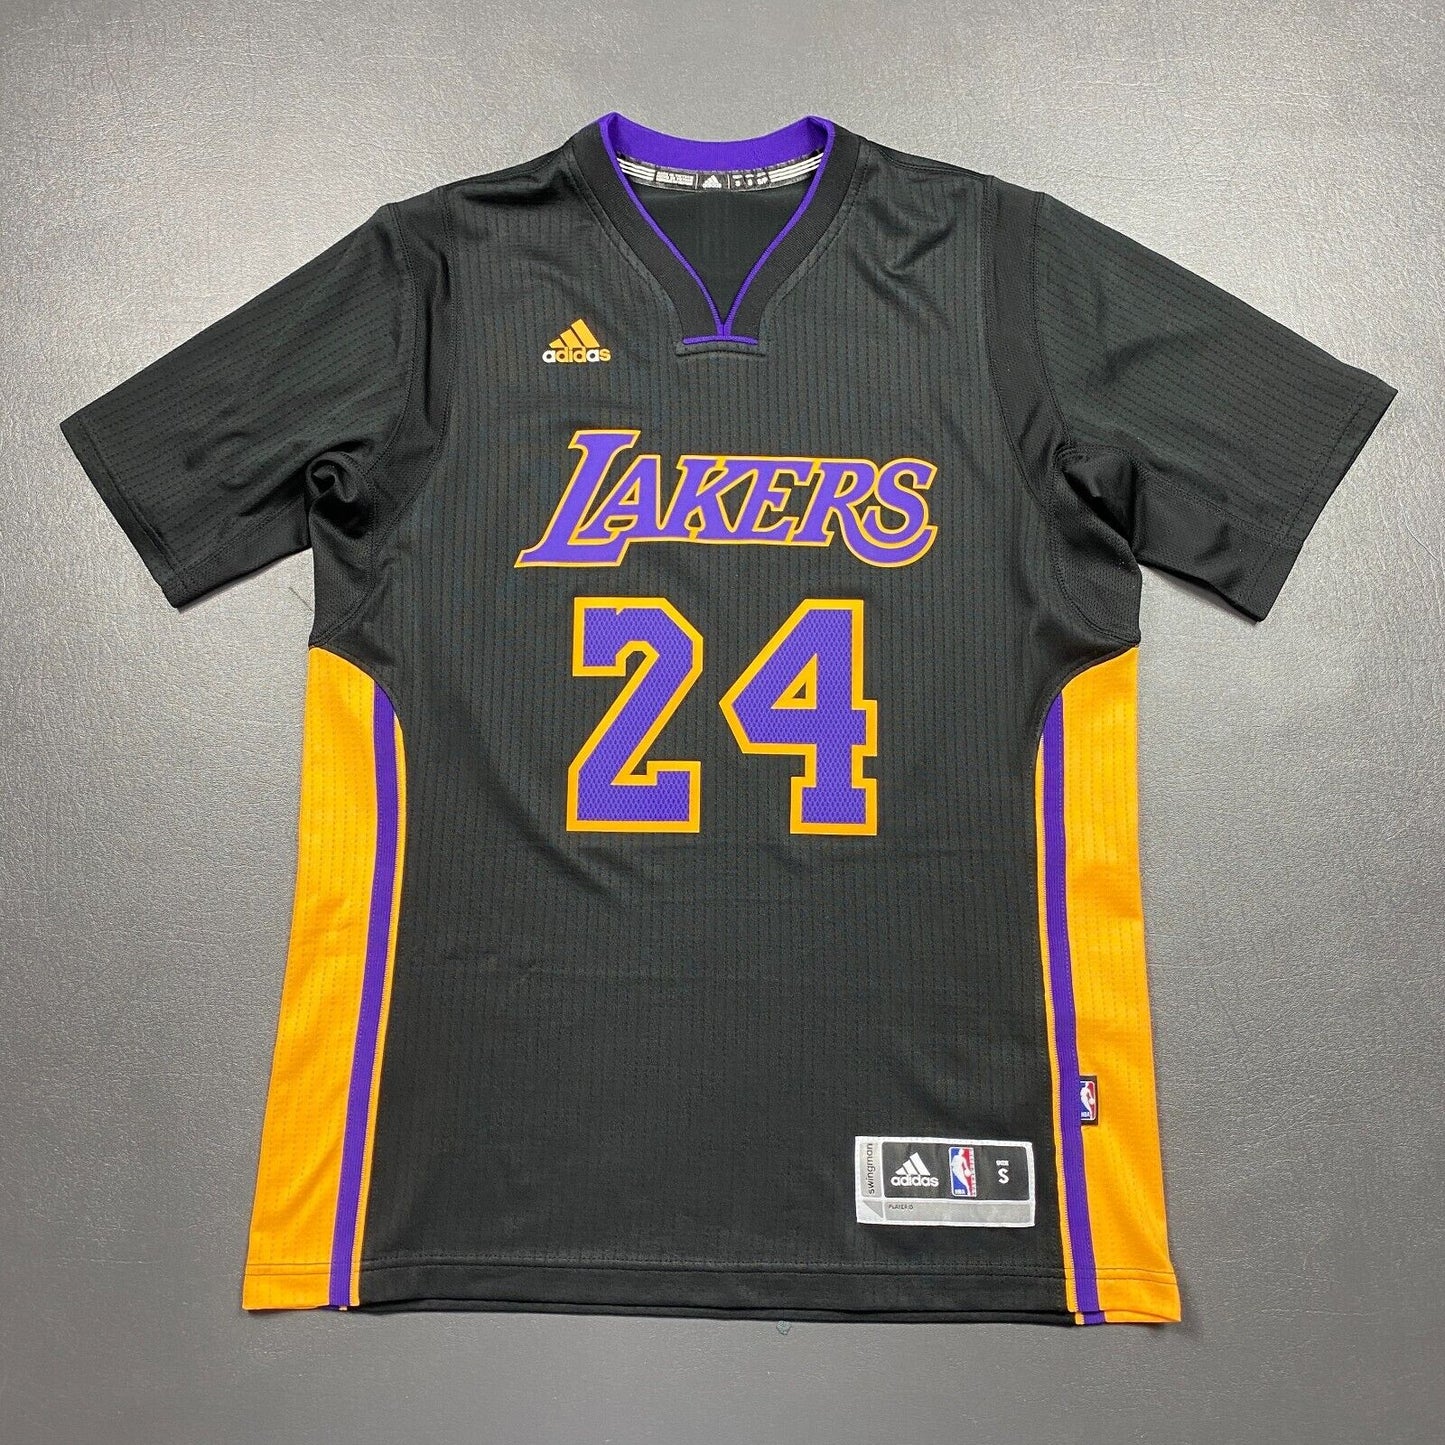 100% Authentic Kobe Bryant Adidas Hollywood Night Lakers Jersey Size S ( M )